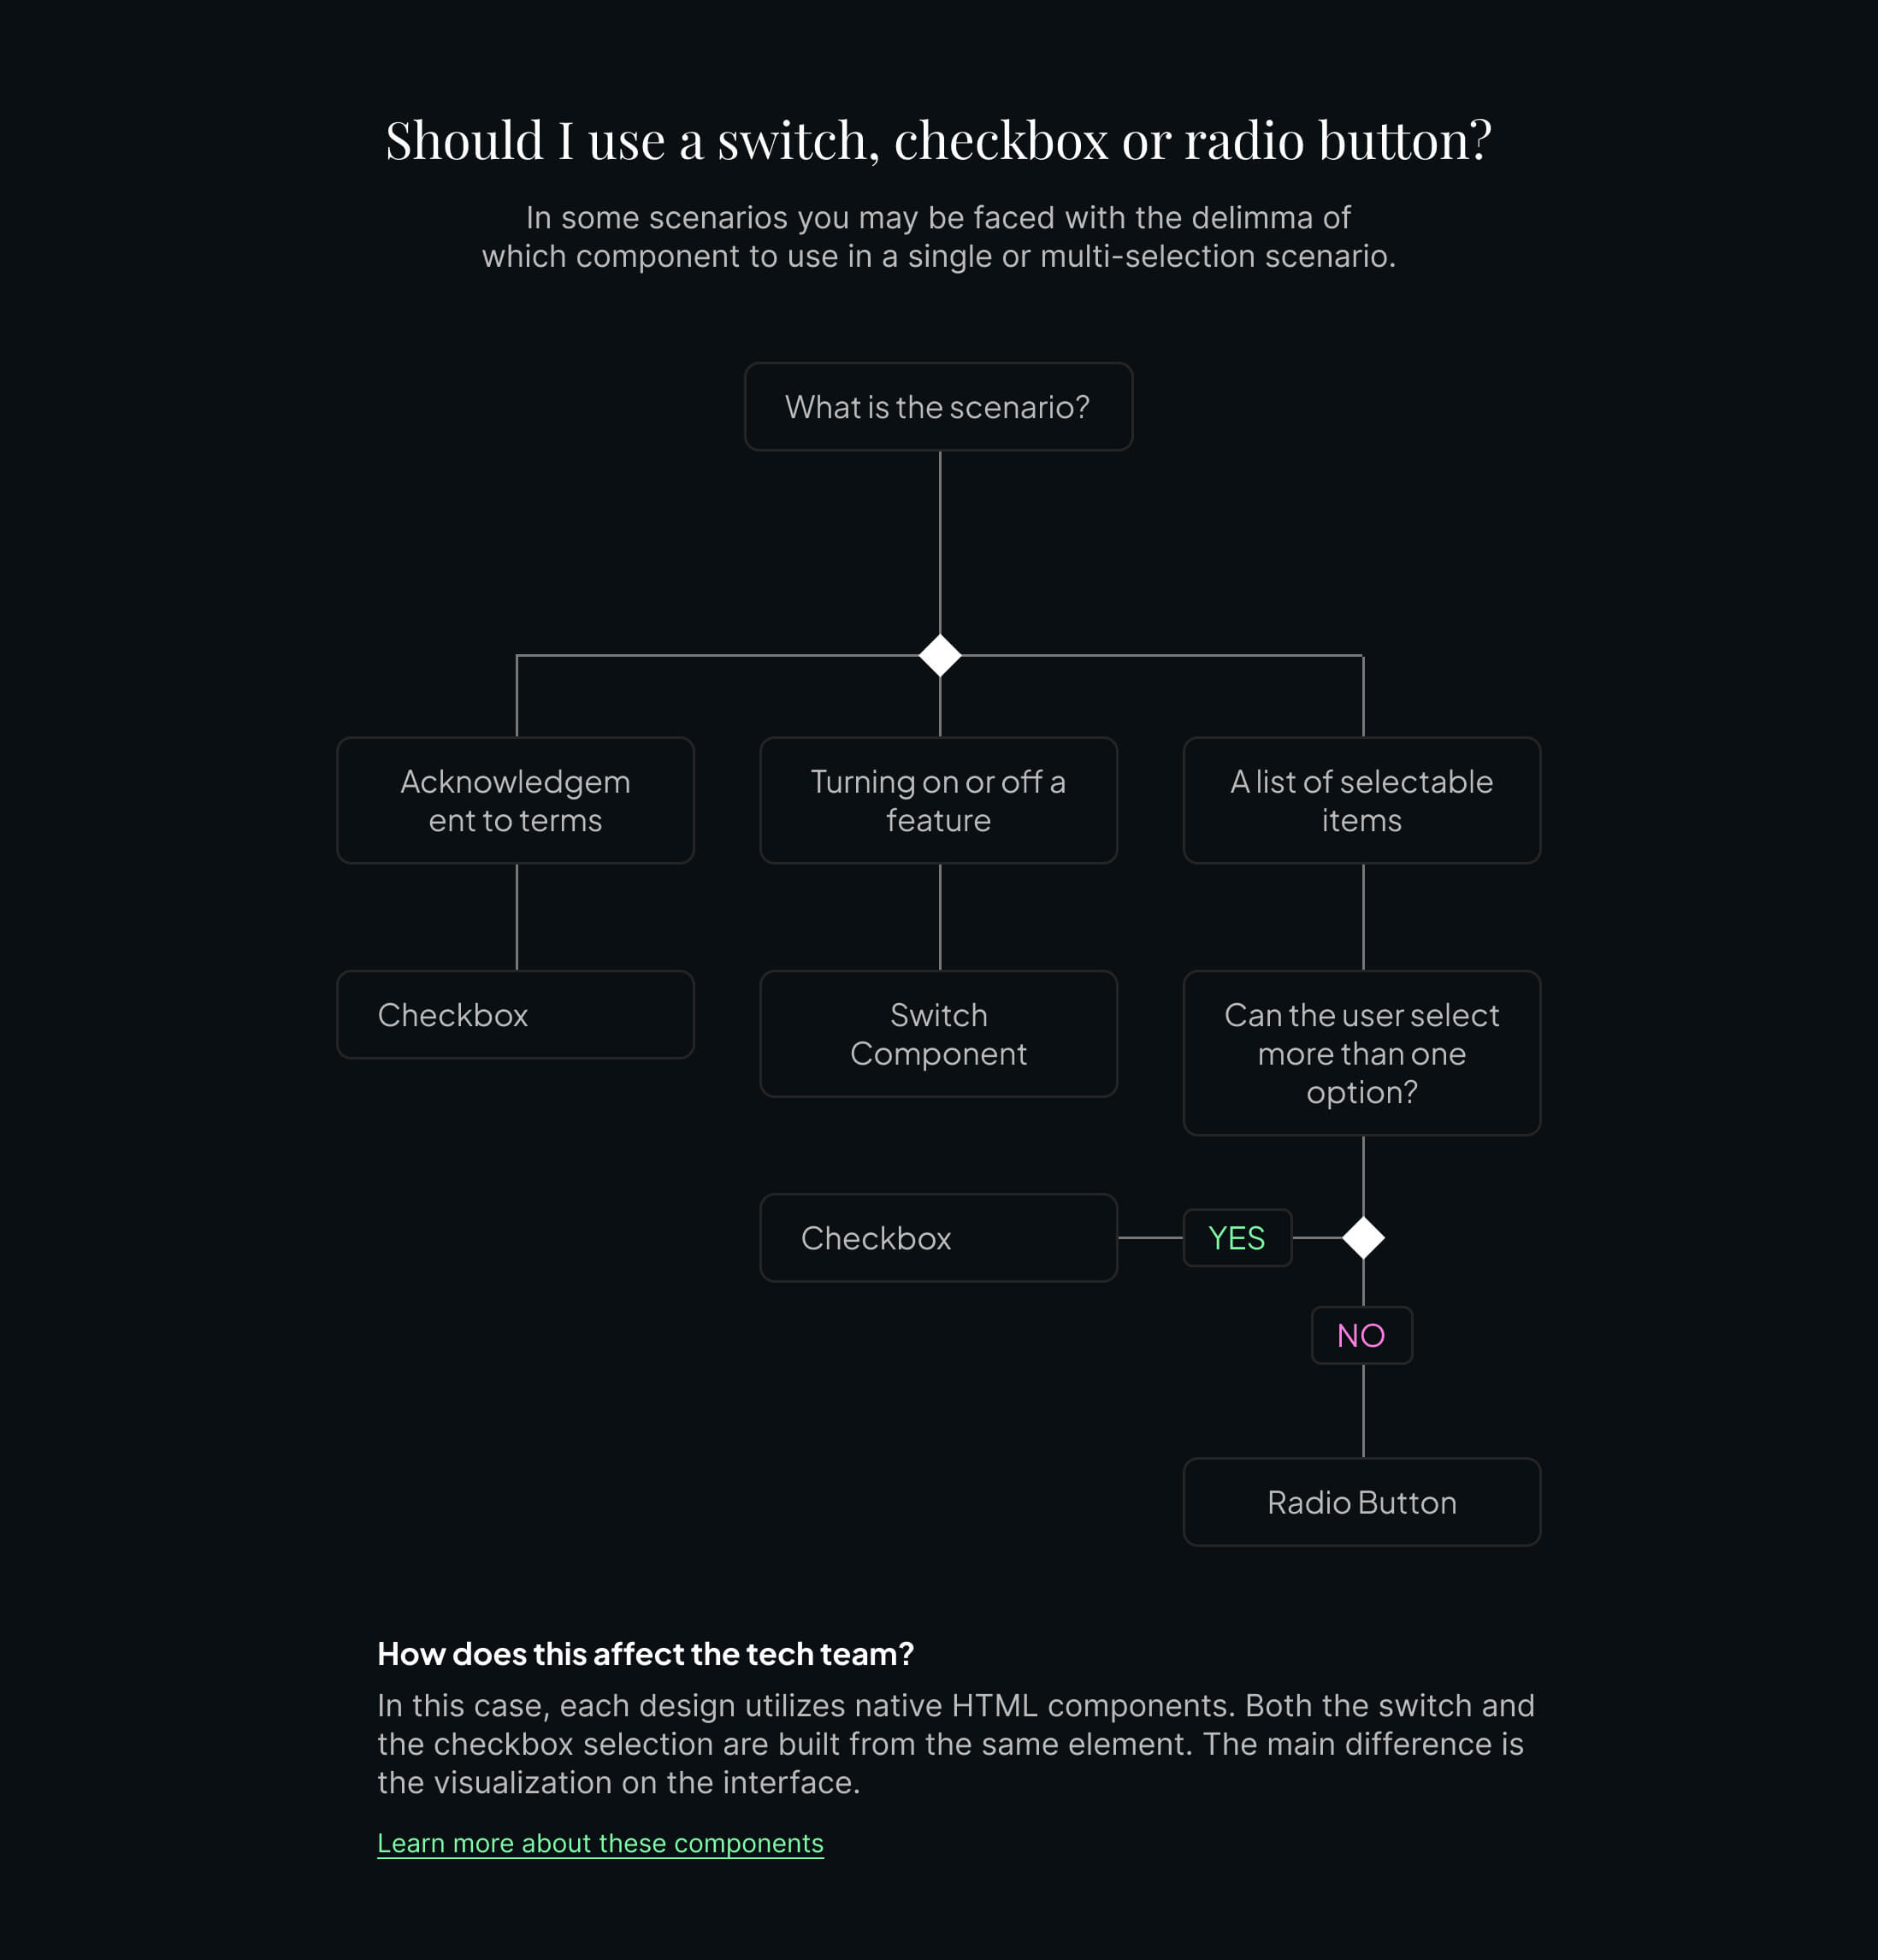 Decision tree to decide between radio button, checkbox and switch